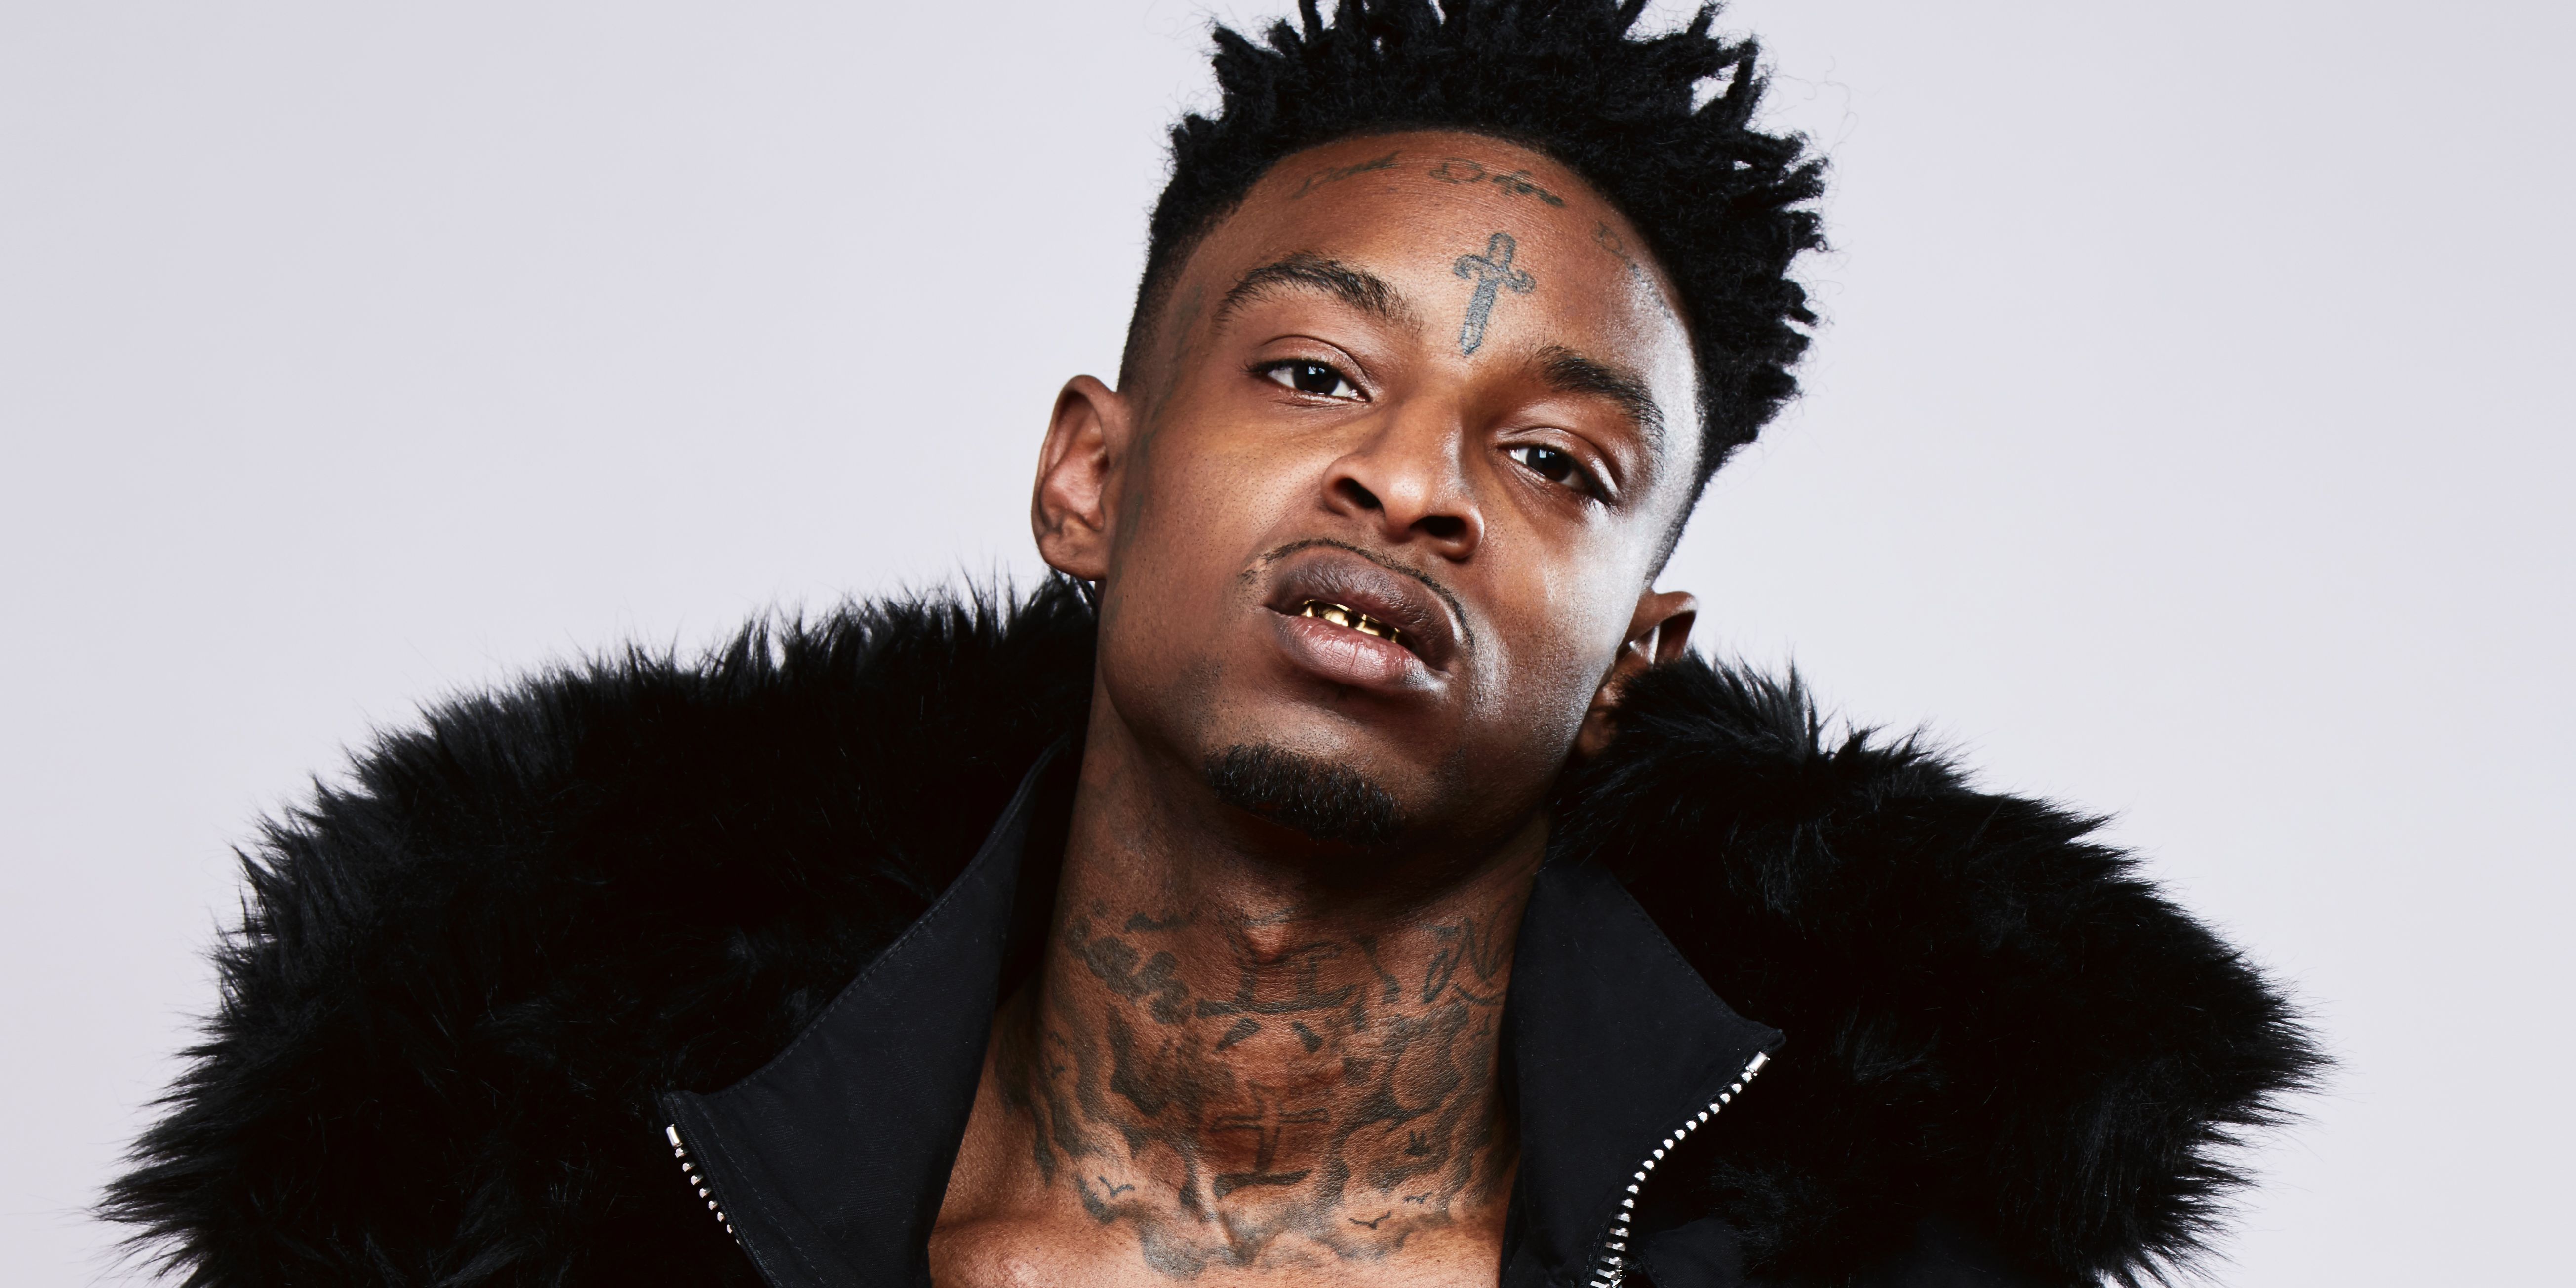 Monster Energy Outbreak Presents: 21 Savage - Issa Tour